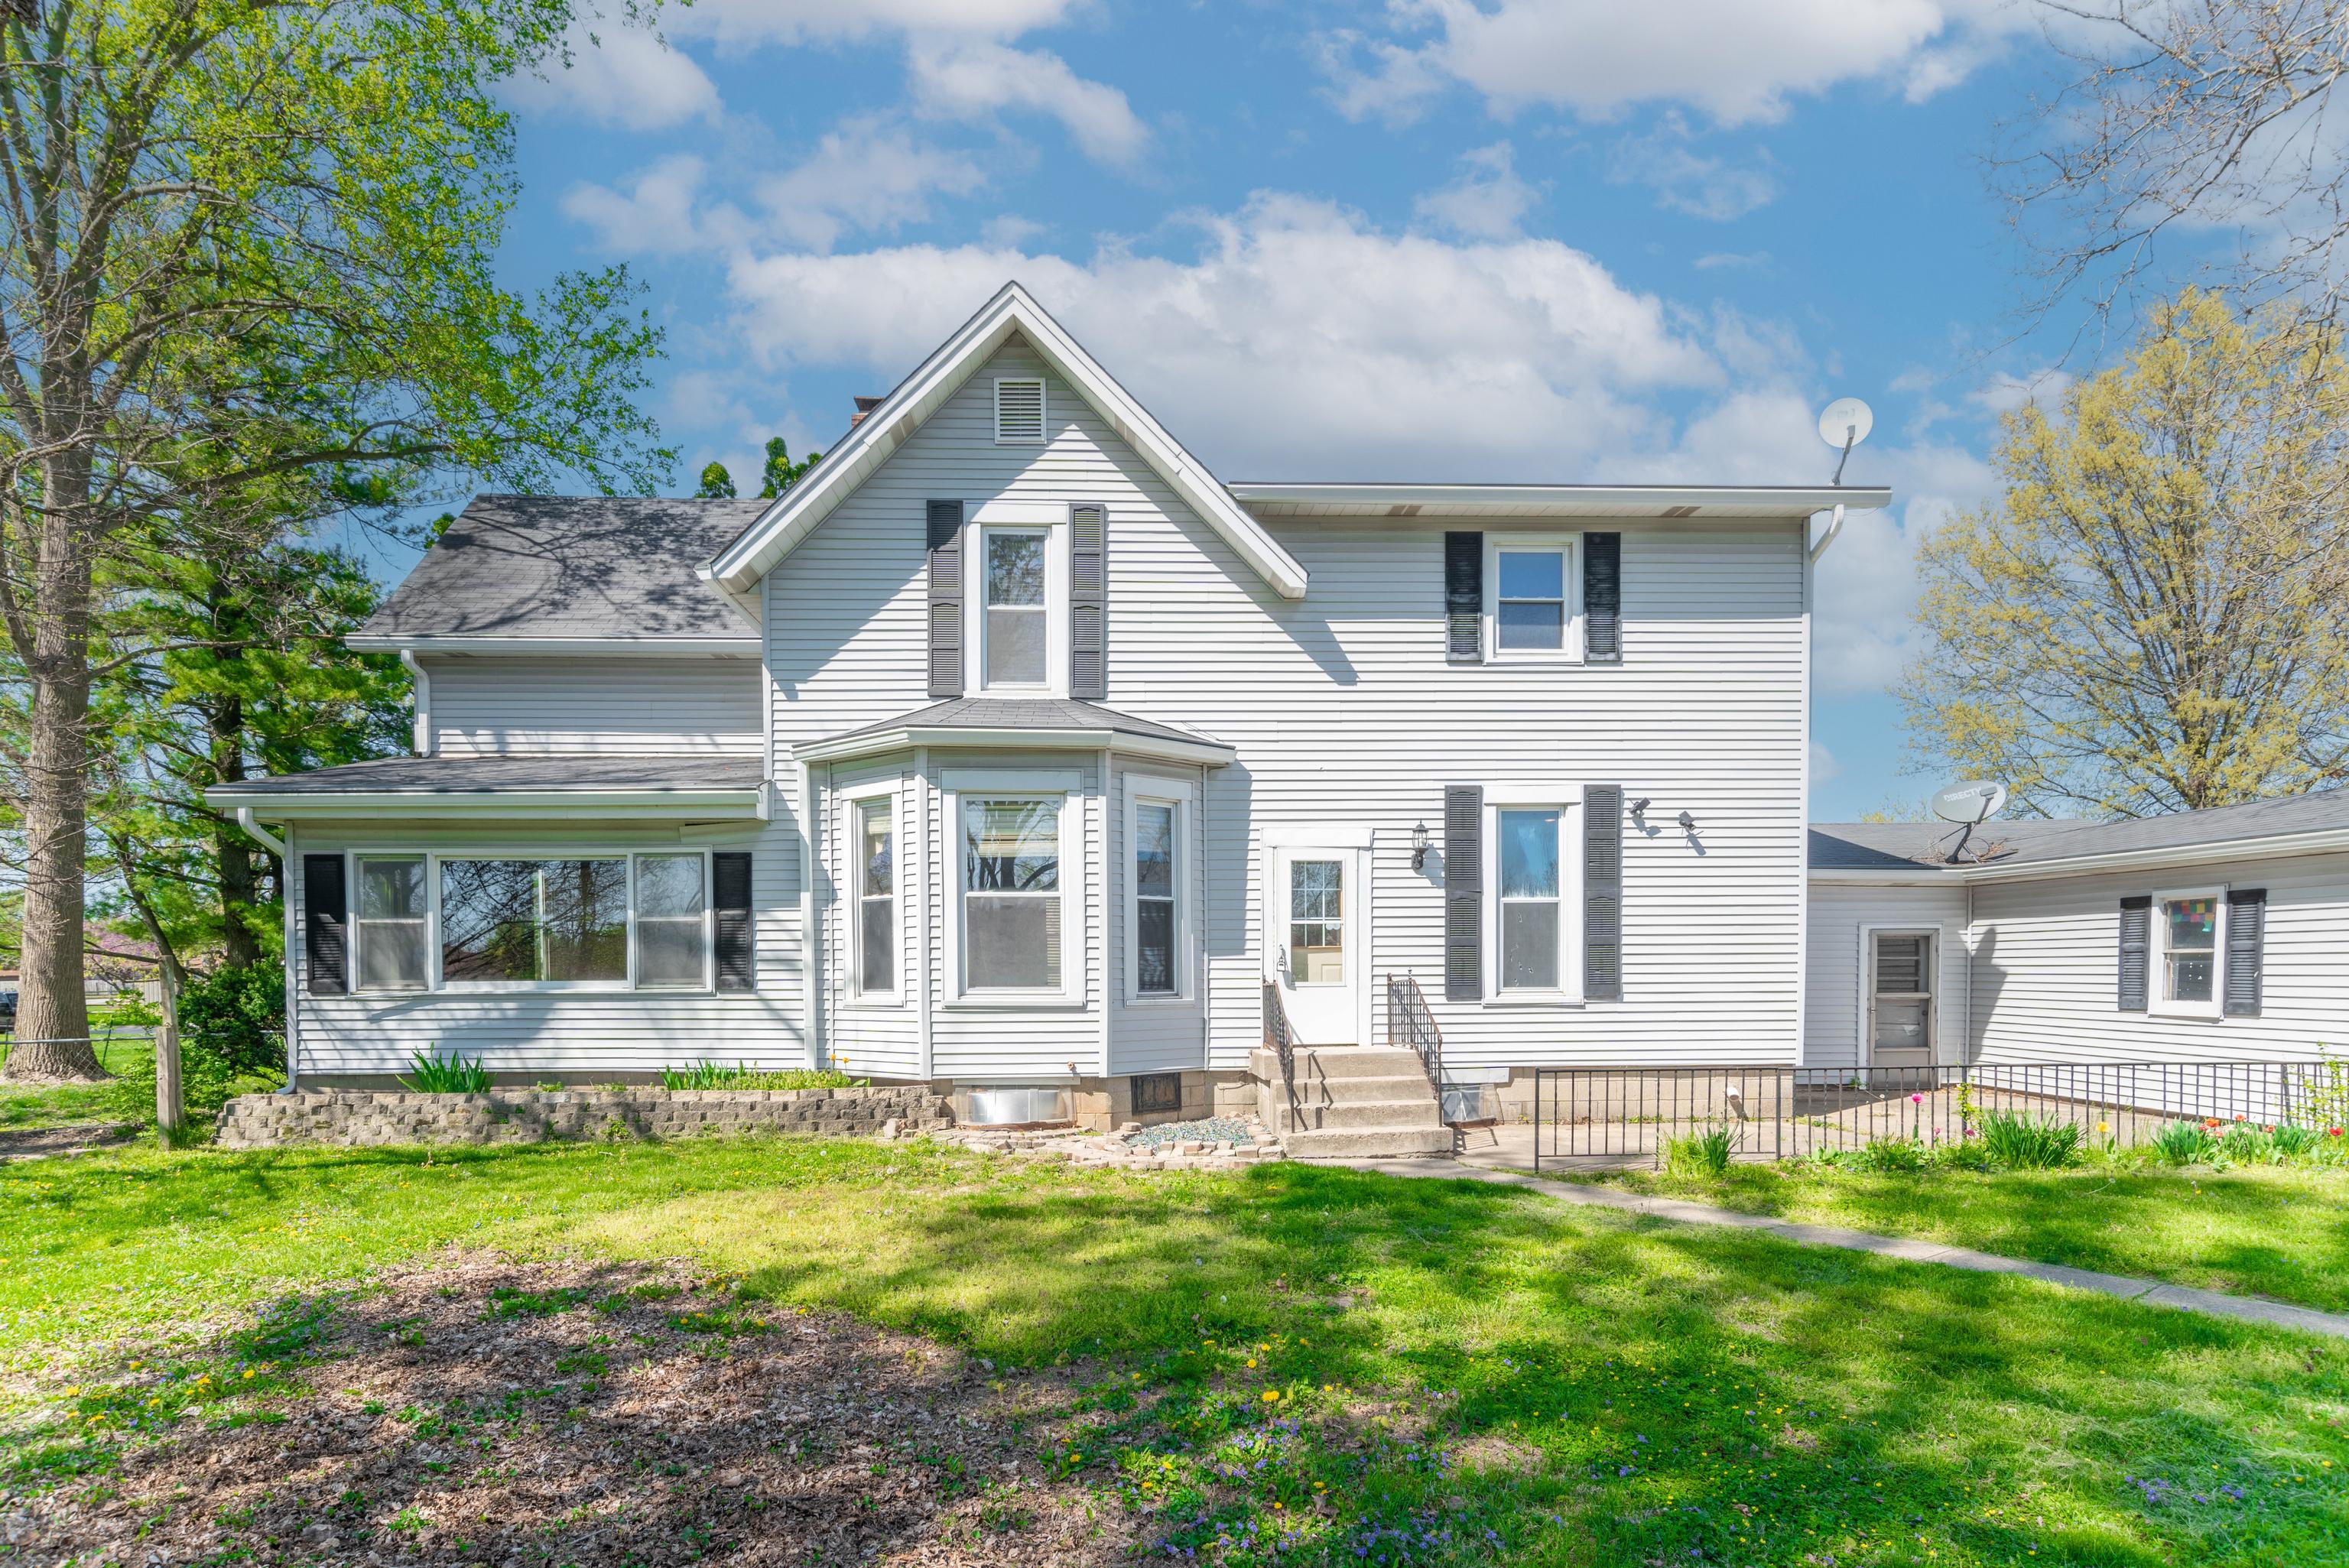 Photo one of 6331 Zionsville Rd Indianapolis IN 46268 | MLS 21973737